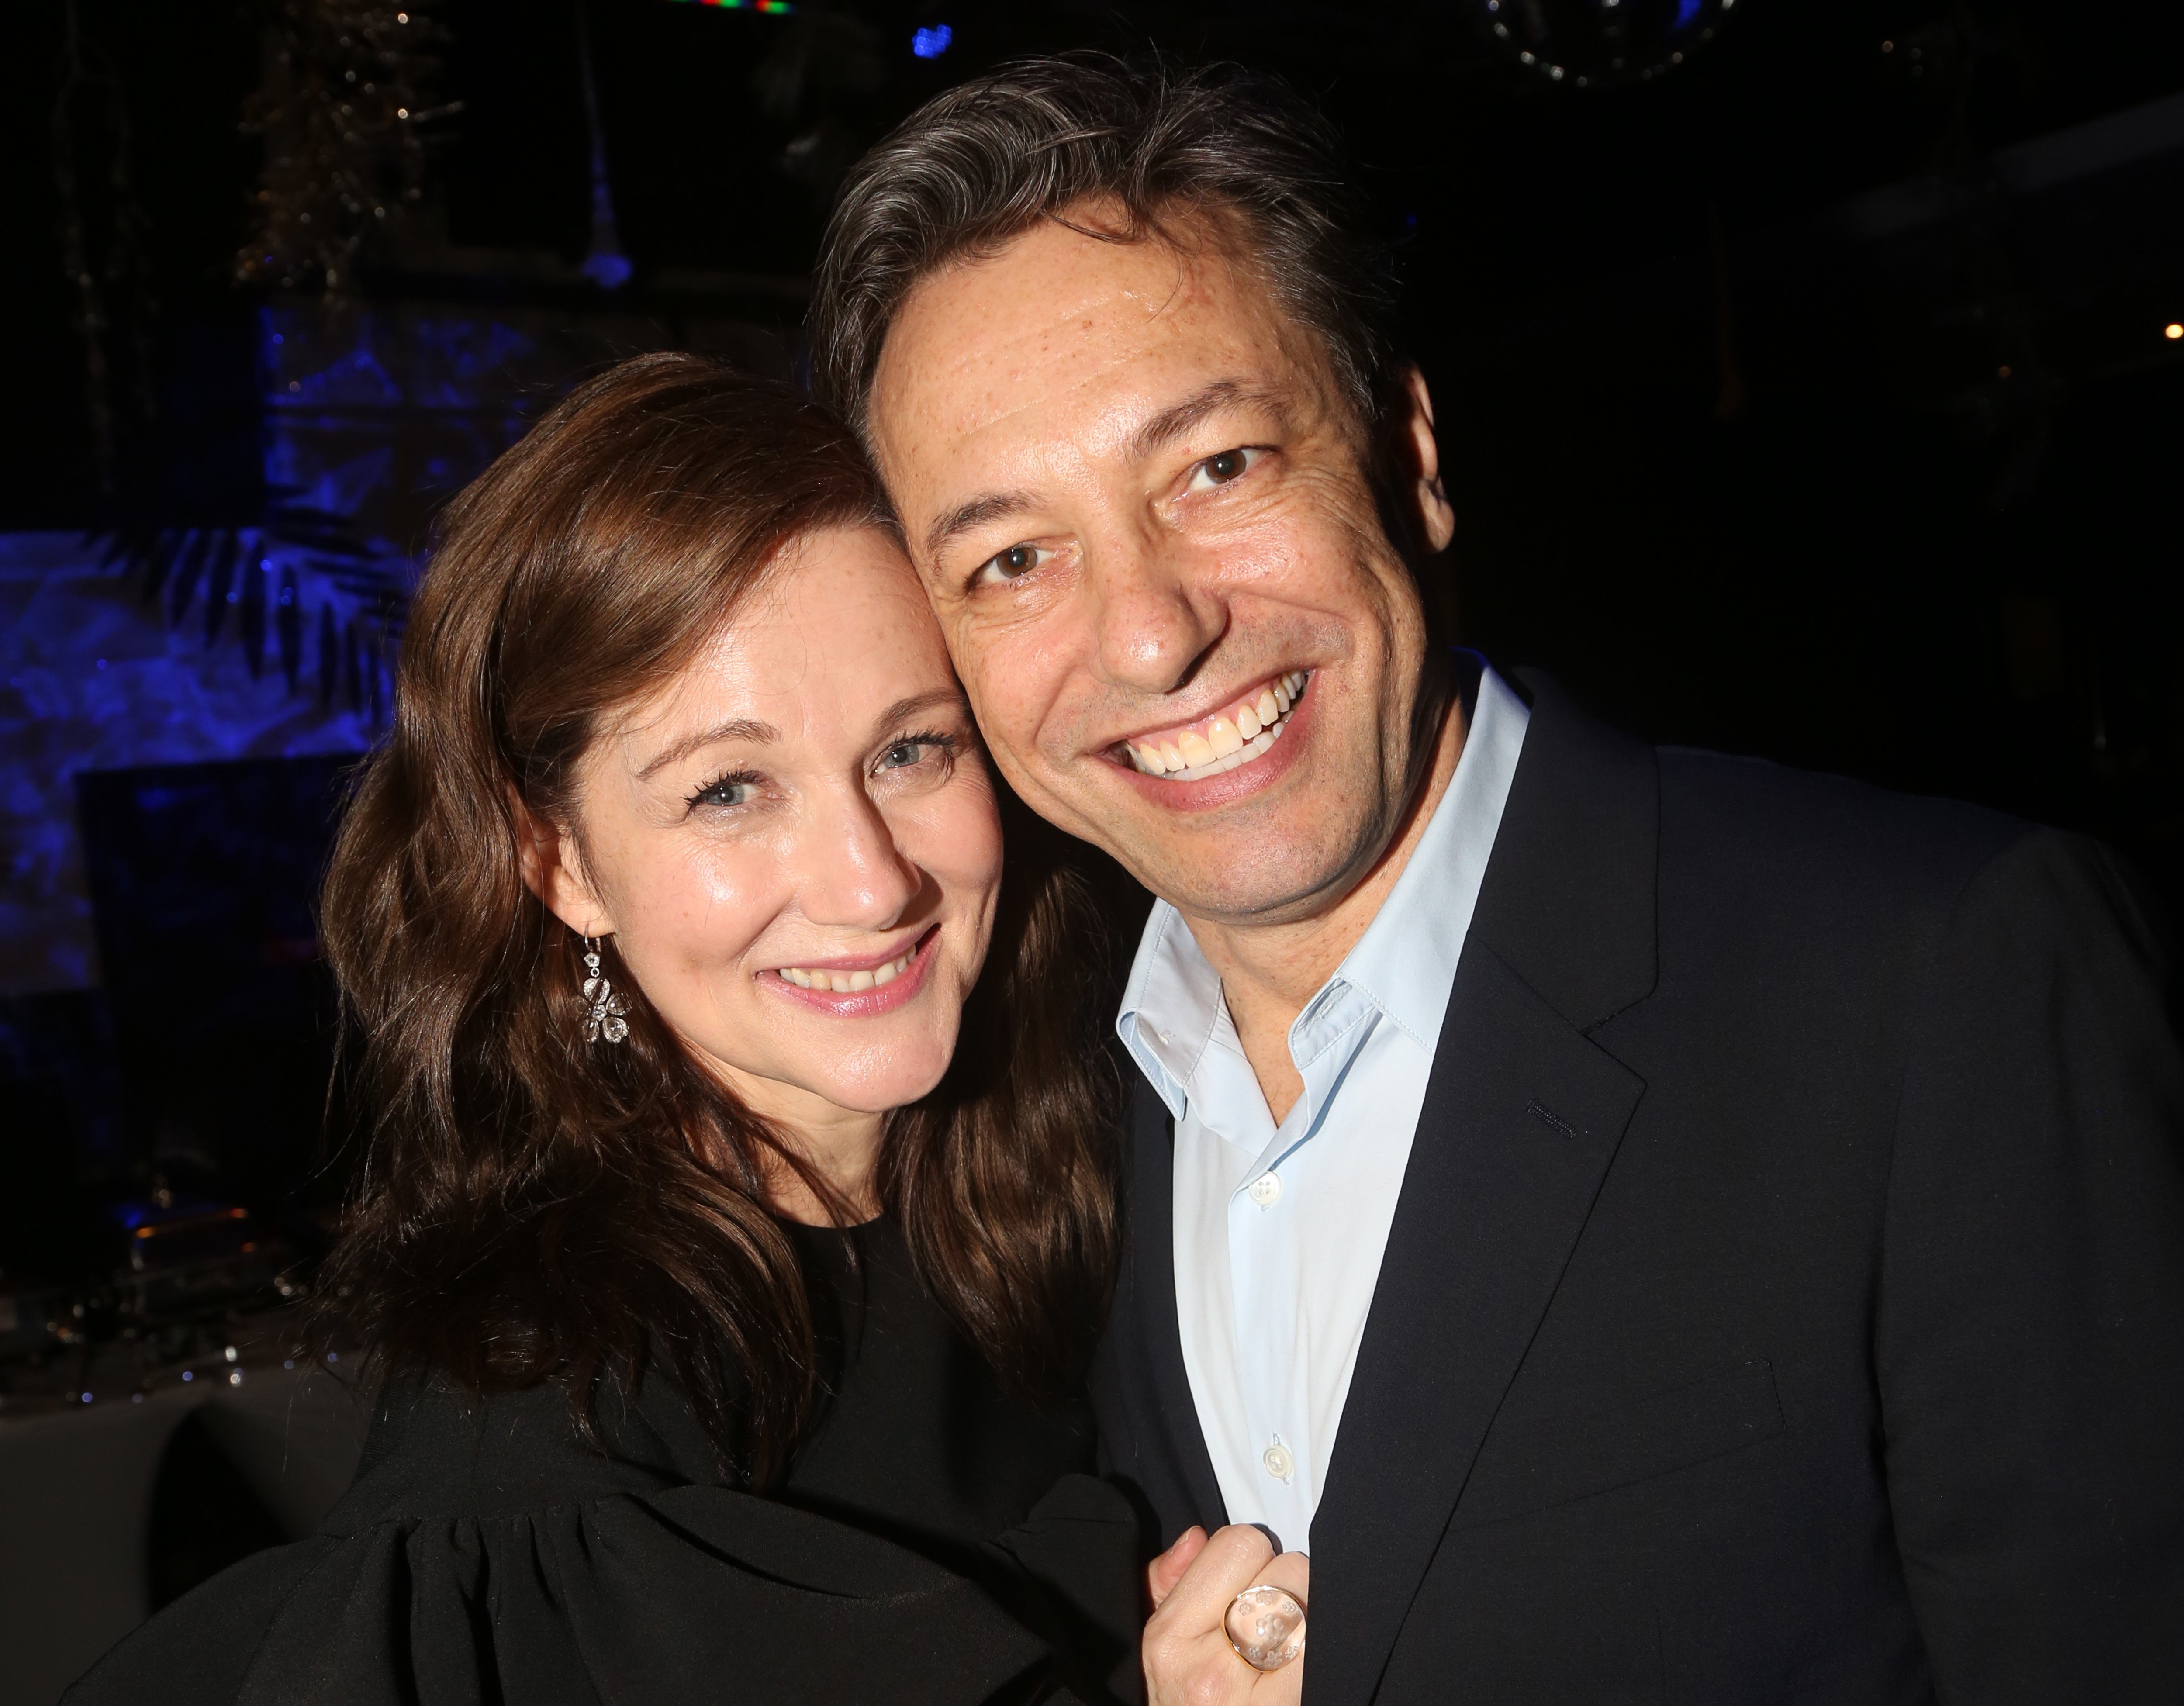 Laura Linney and husband Marc Schauer at the opening night after party for the new play "My Name Is Lucy Barton" on January 15, 2020, in New York. | Source: Getty Images